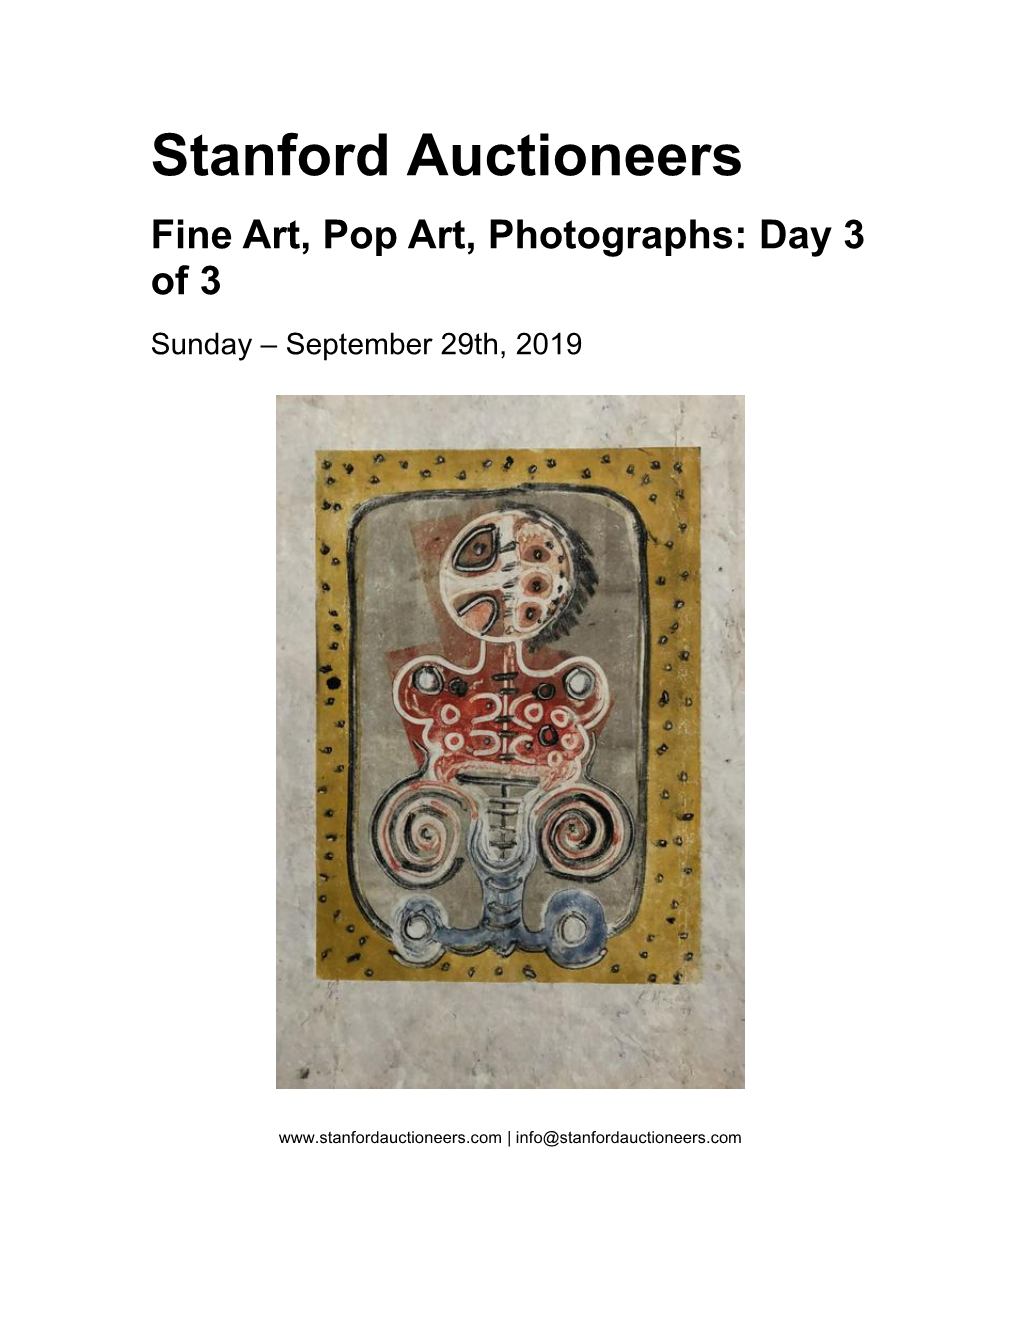 Stanford Auctioneers Fine Art, Pop Art, Photographs: Day 3 of 3 Sunday – September 29Th, 2019